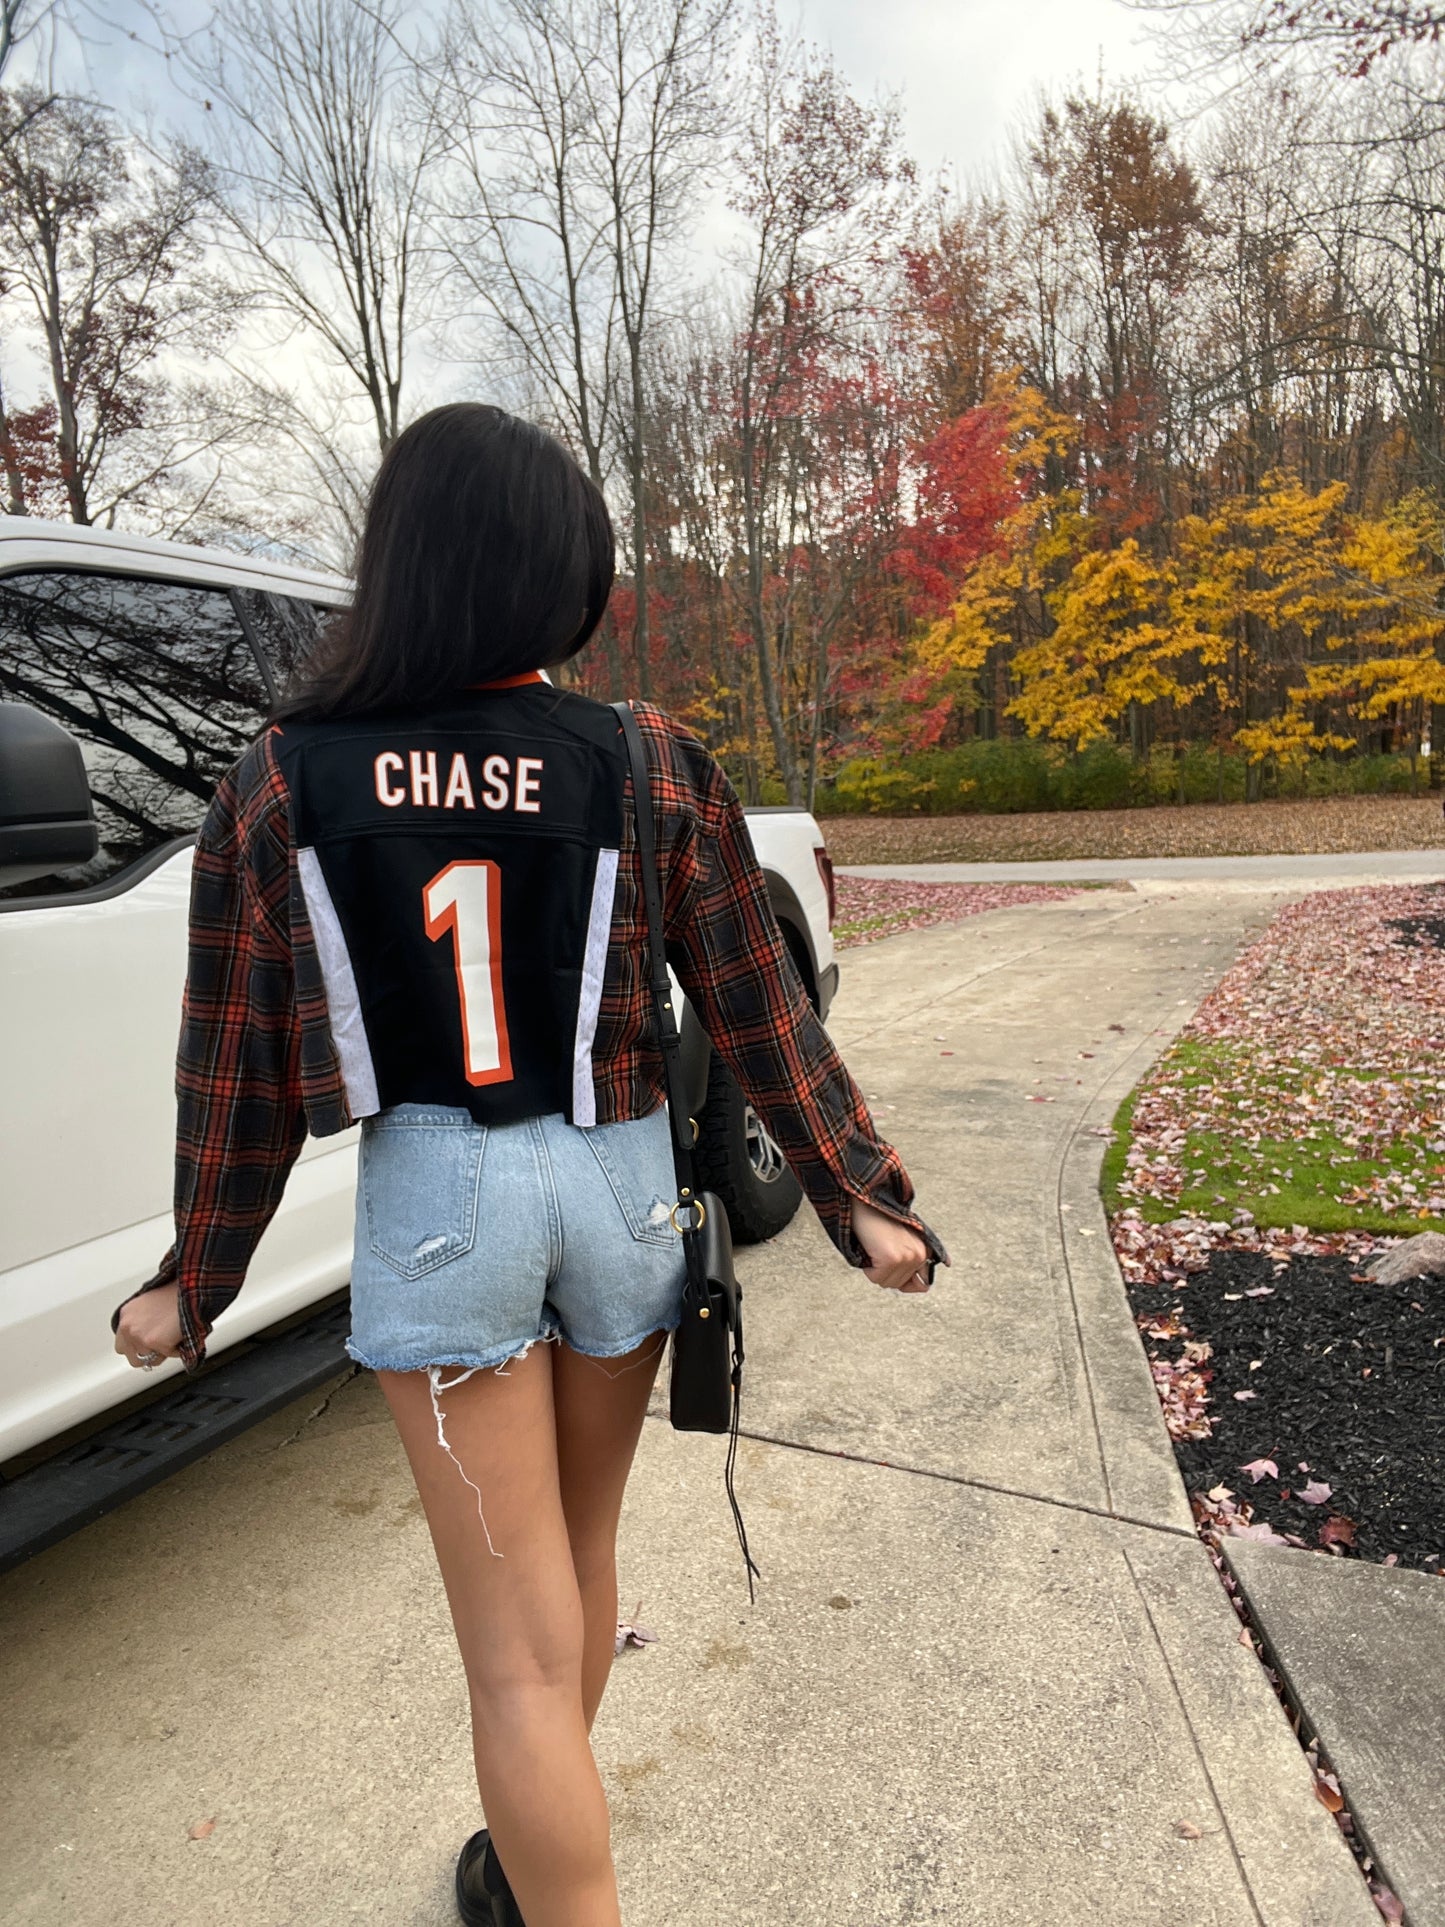 #1 CHASE BENGALS JERSEY X FLANNELS